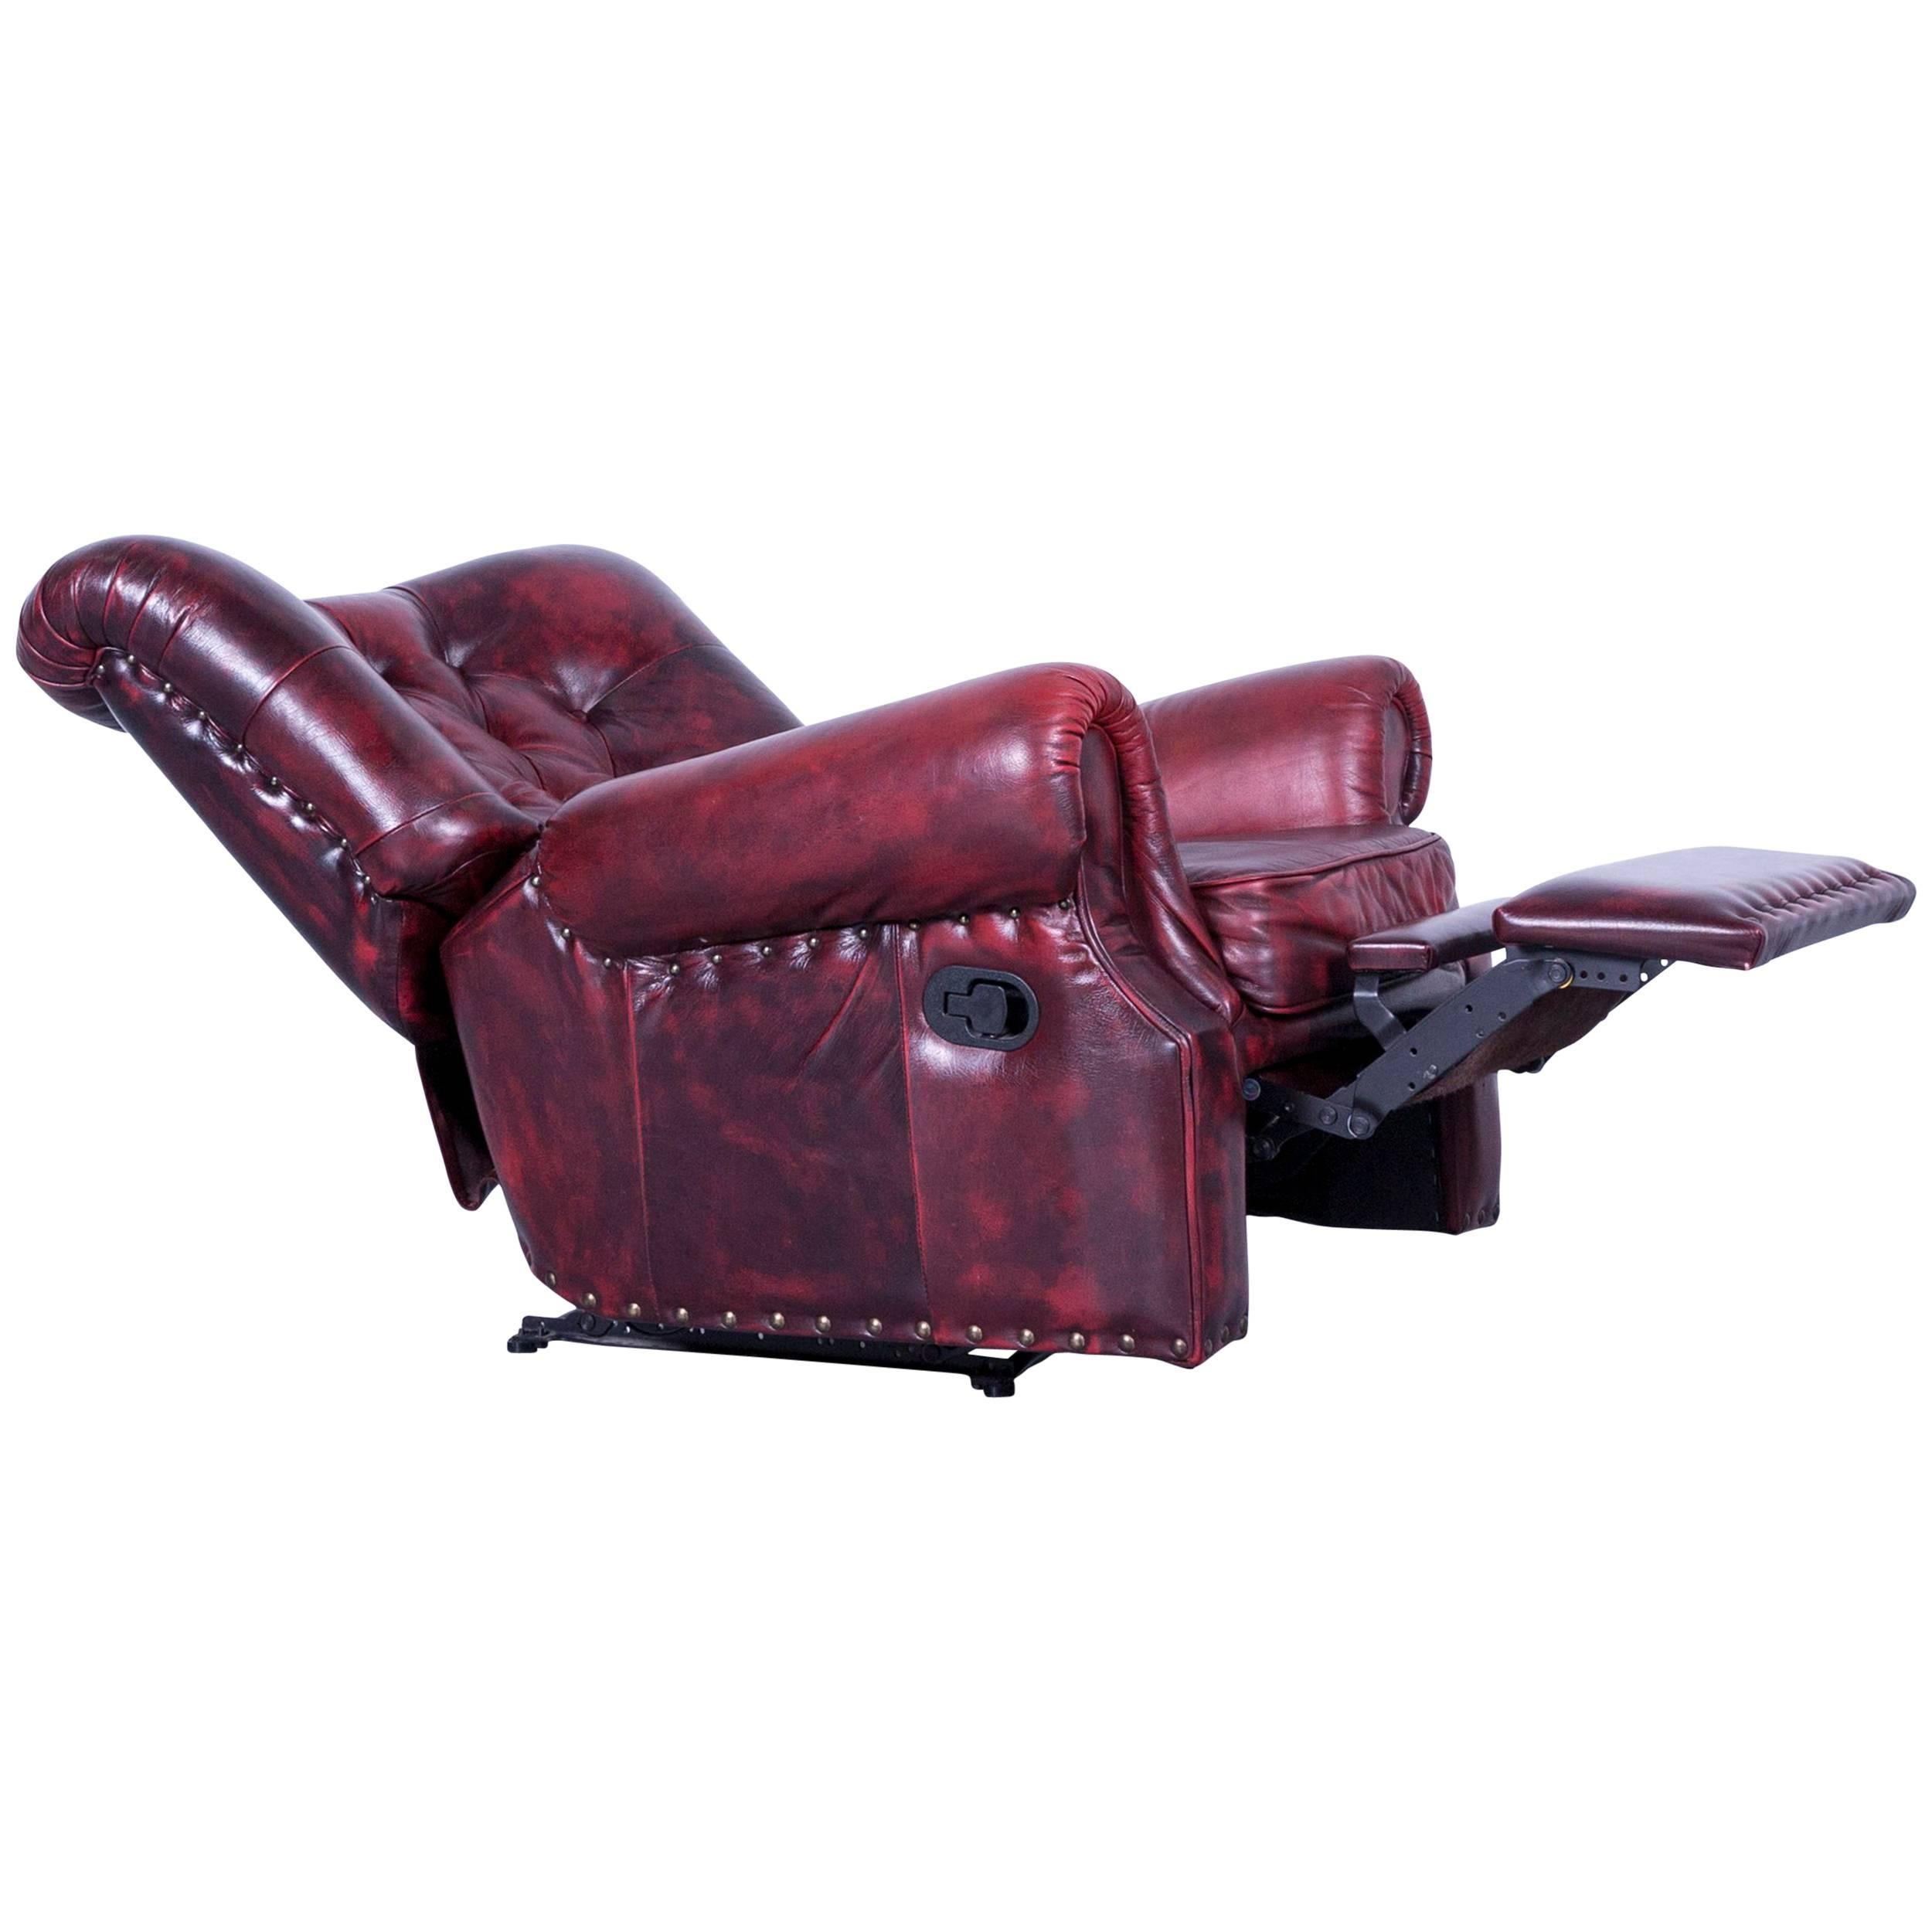 Chesterfield Armchair Oxblood Red Leather Buttoned Recliner Function Vintage